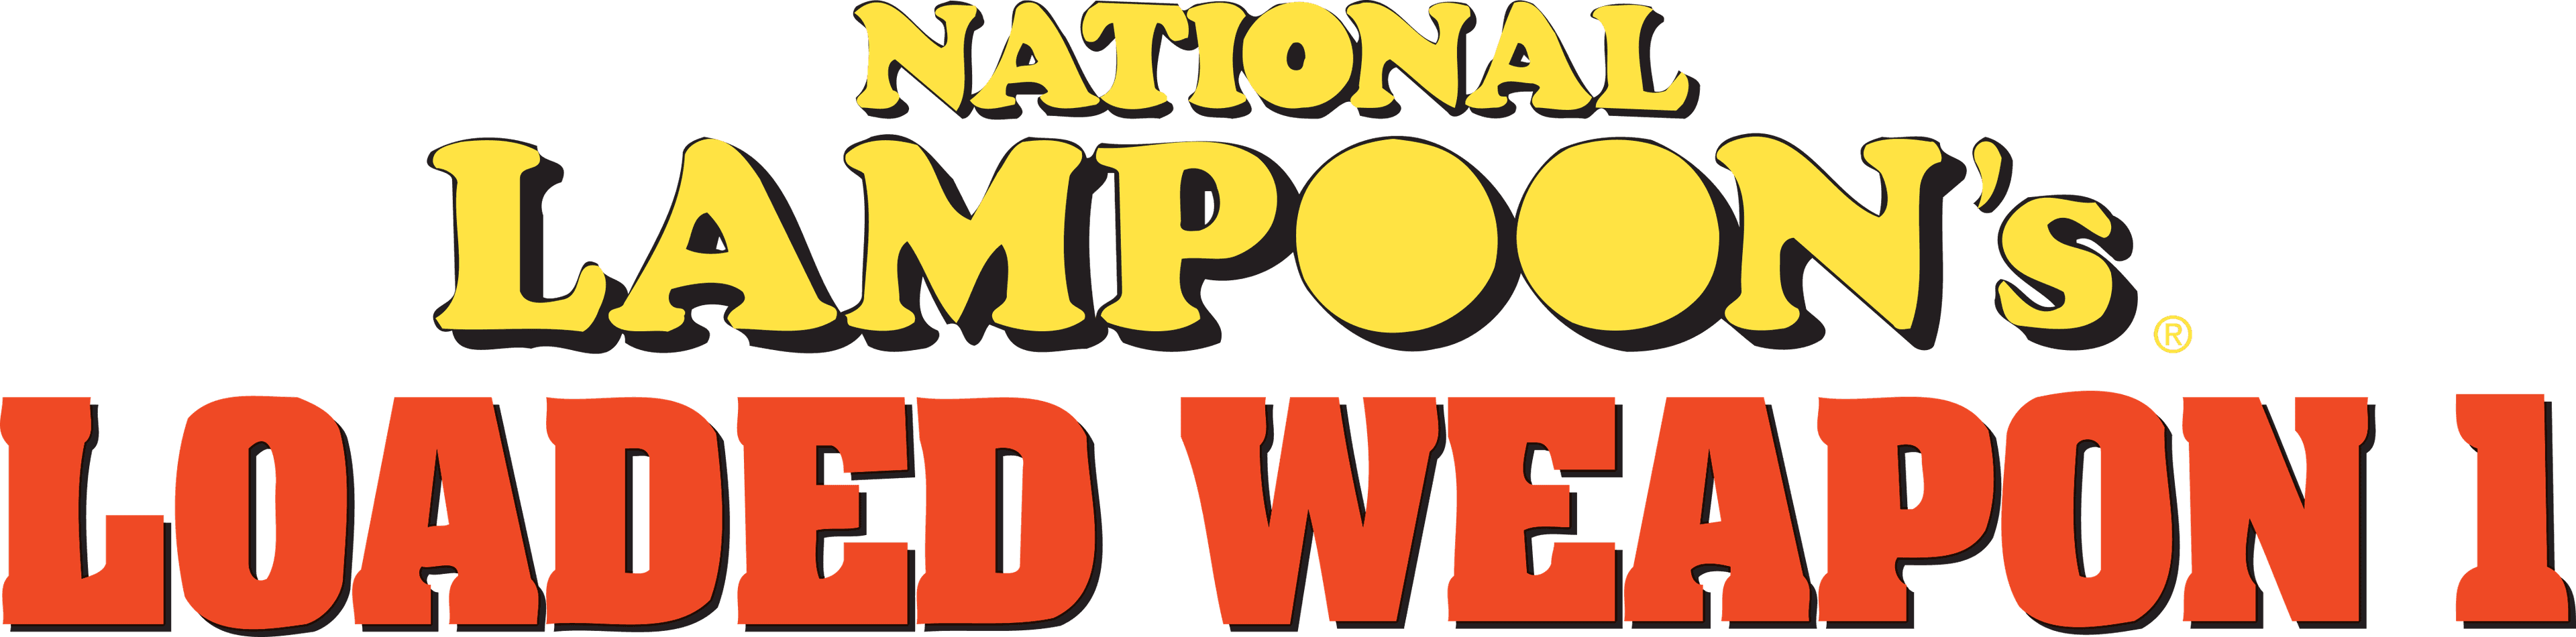 National Lampoon's Loaded Weapon 1 logo